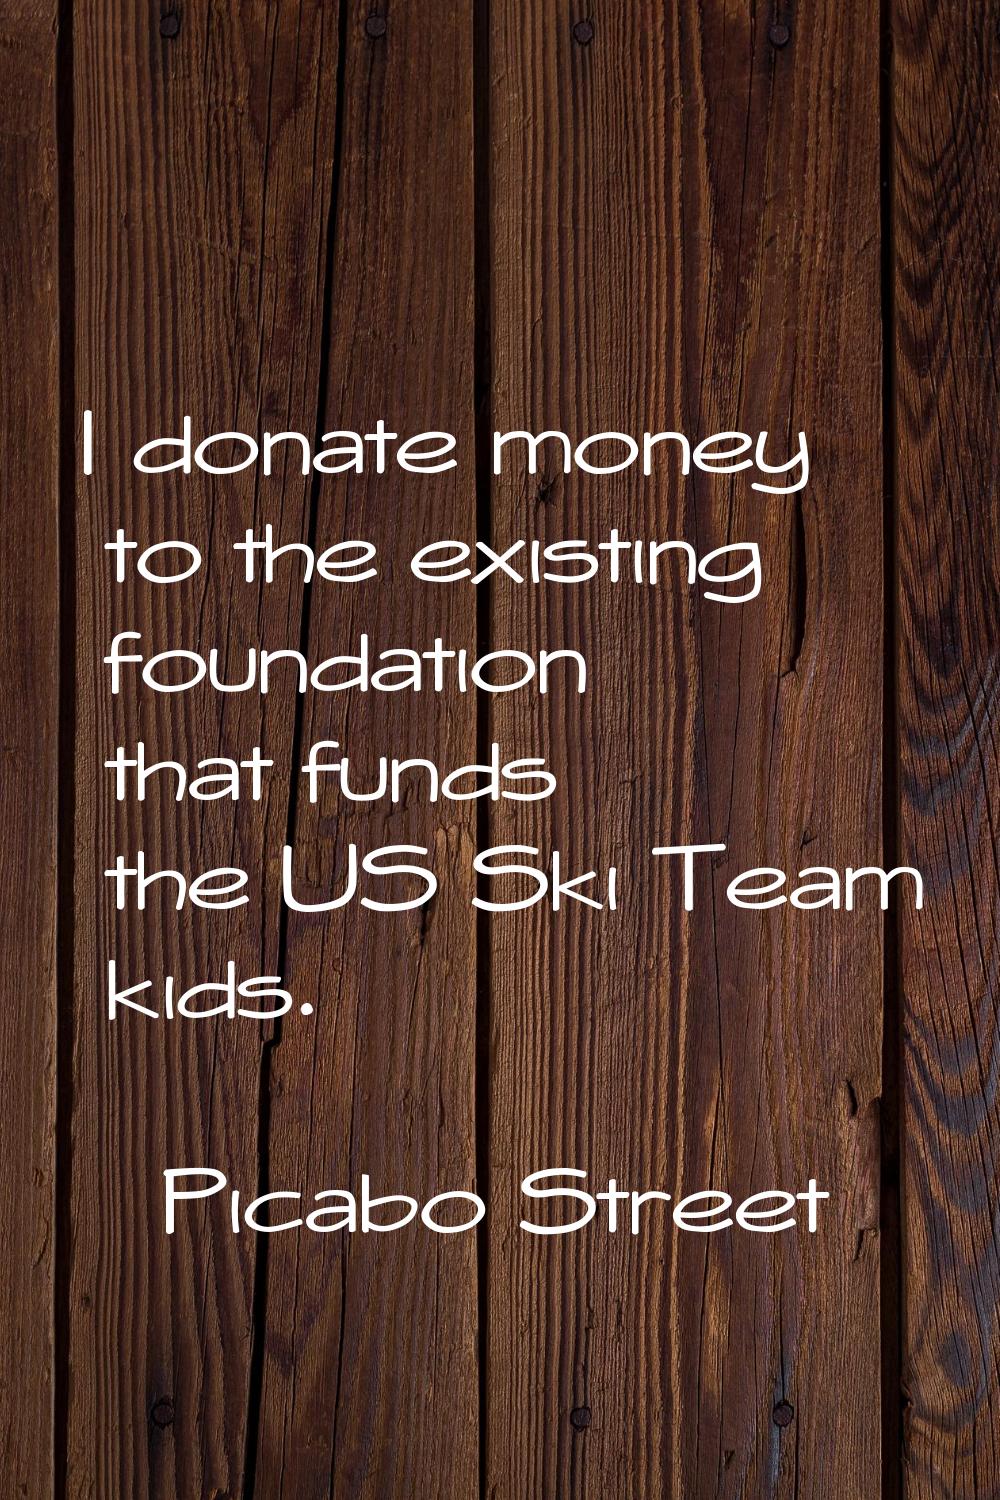 I donate money to the existing foundation that funds the US Ski Team kids.